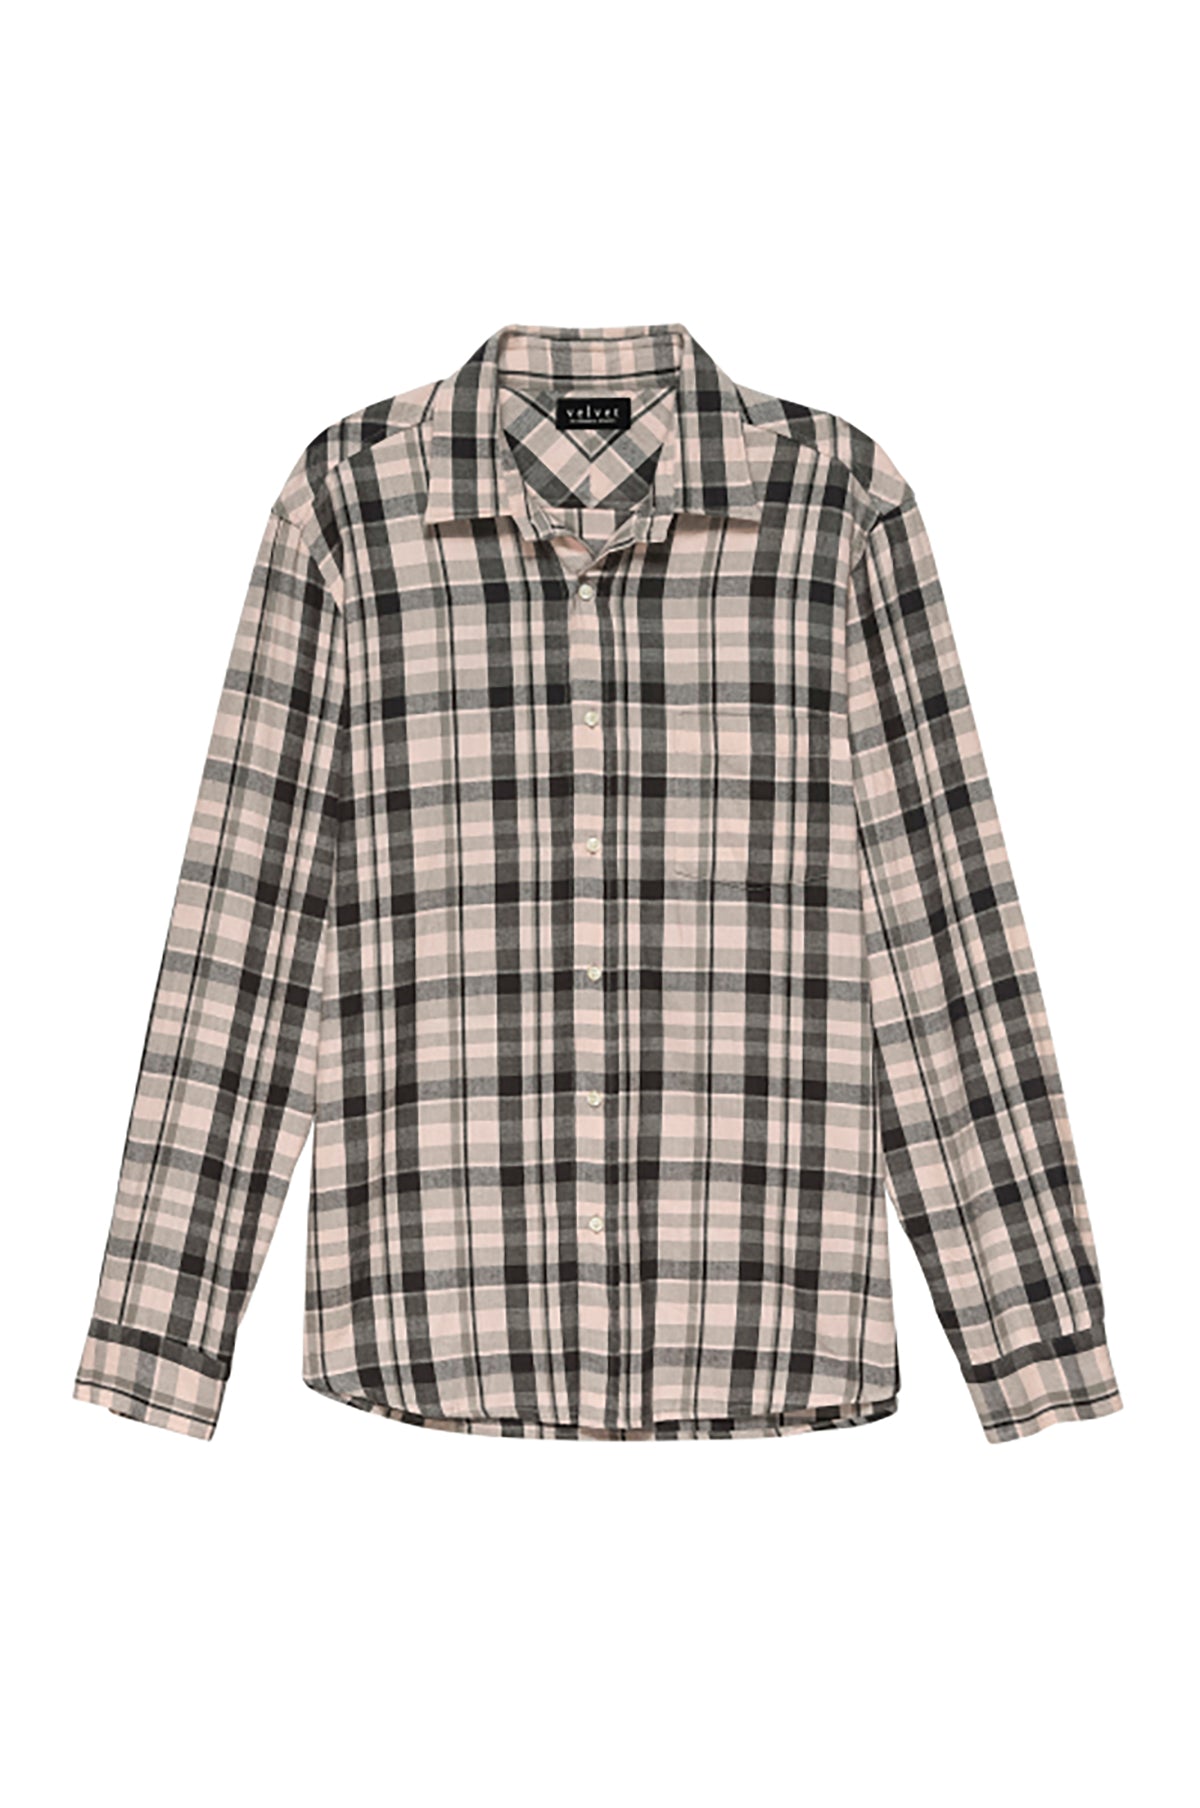 a LEONARD PLAID BUTTON-UP SHIRT in black and white by Velvet by Graham & Spencer.-26022591332545